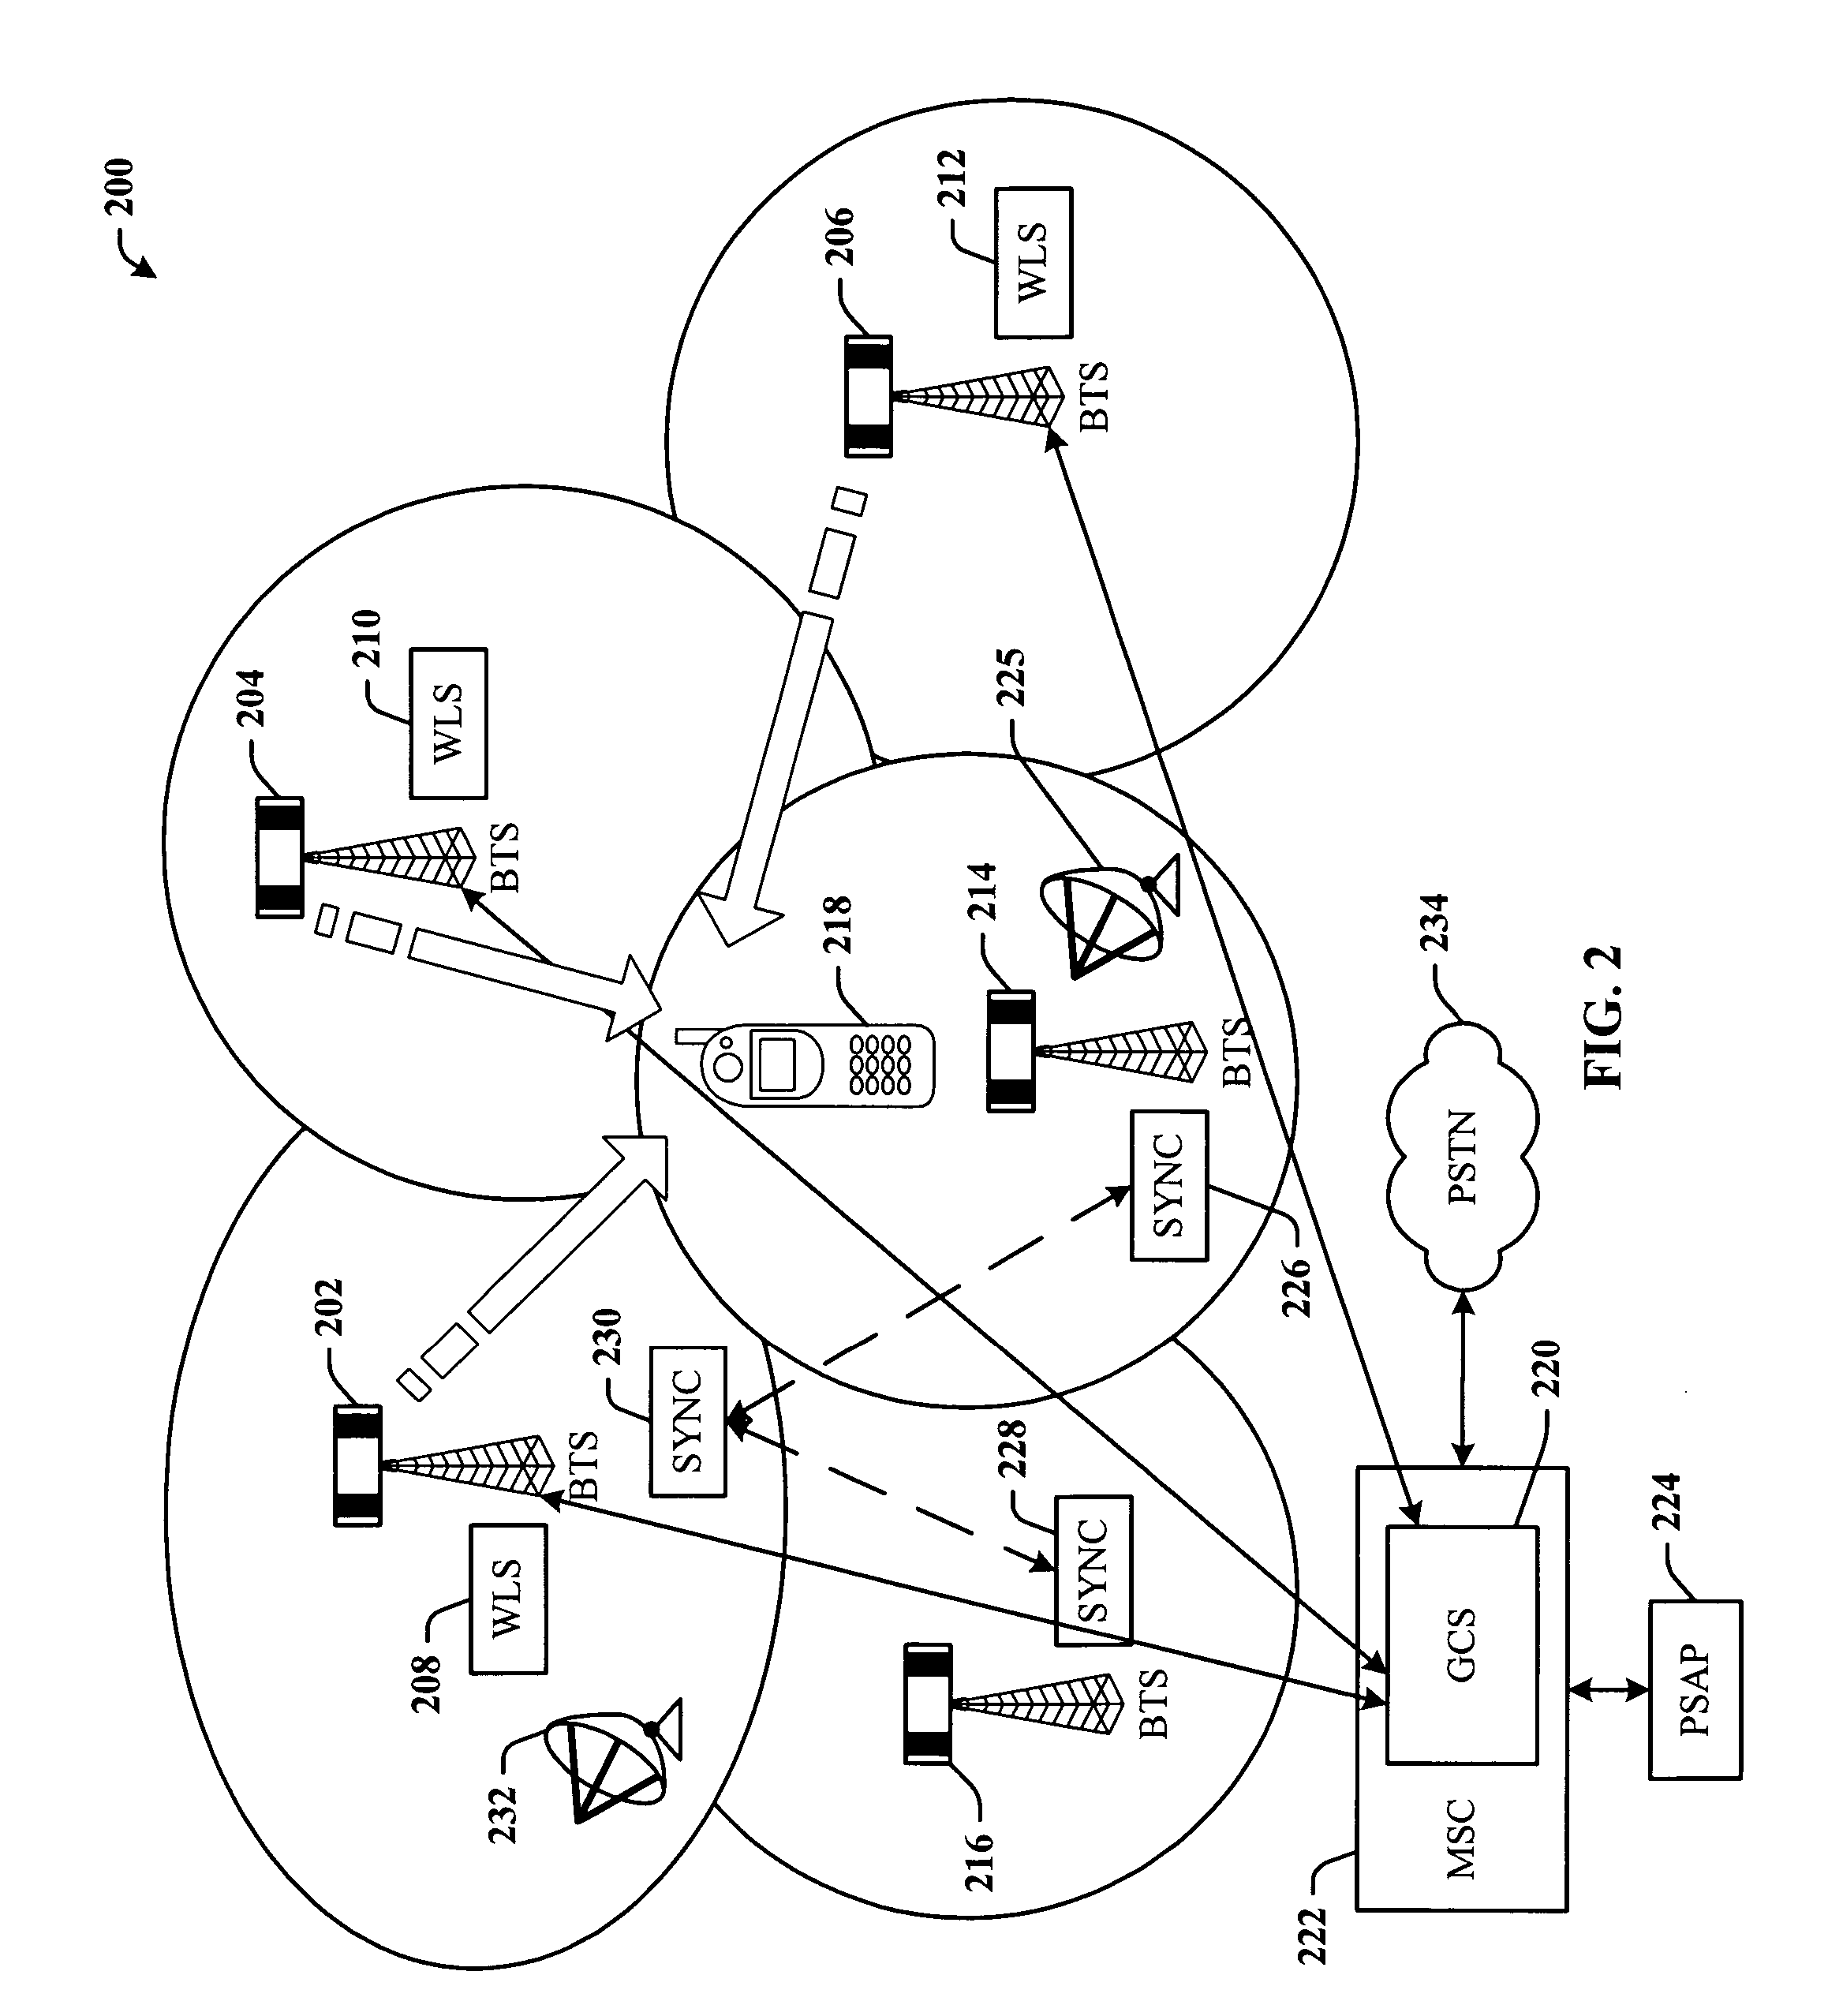 Method and system for providing location information for emergency services